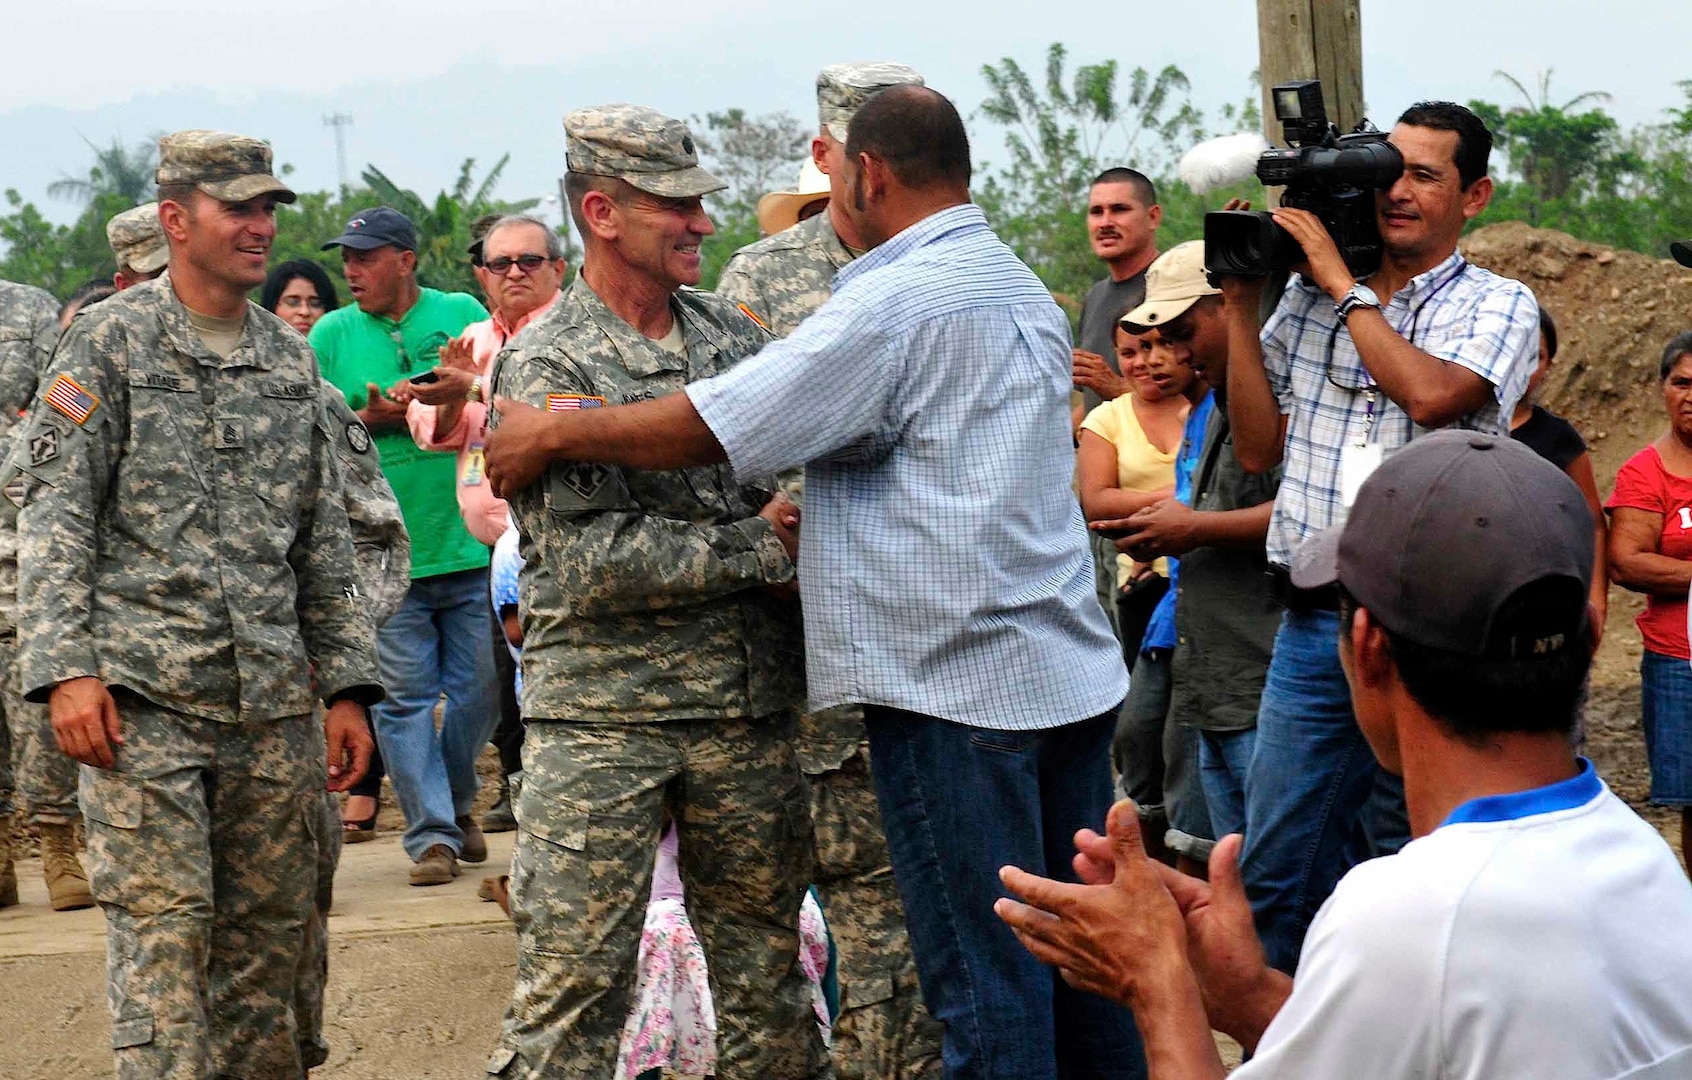 Army South's Task Force Tropic, commanded by Army Lt. Col. Robert L. Jones, Missouri Army National Guard, and Leonidas Matamoros, a community leader who had been instrumental in getting this project for his community, thanked each for their mutual help in building a school, in Micheletti, Honduras, May 8, 2012.